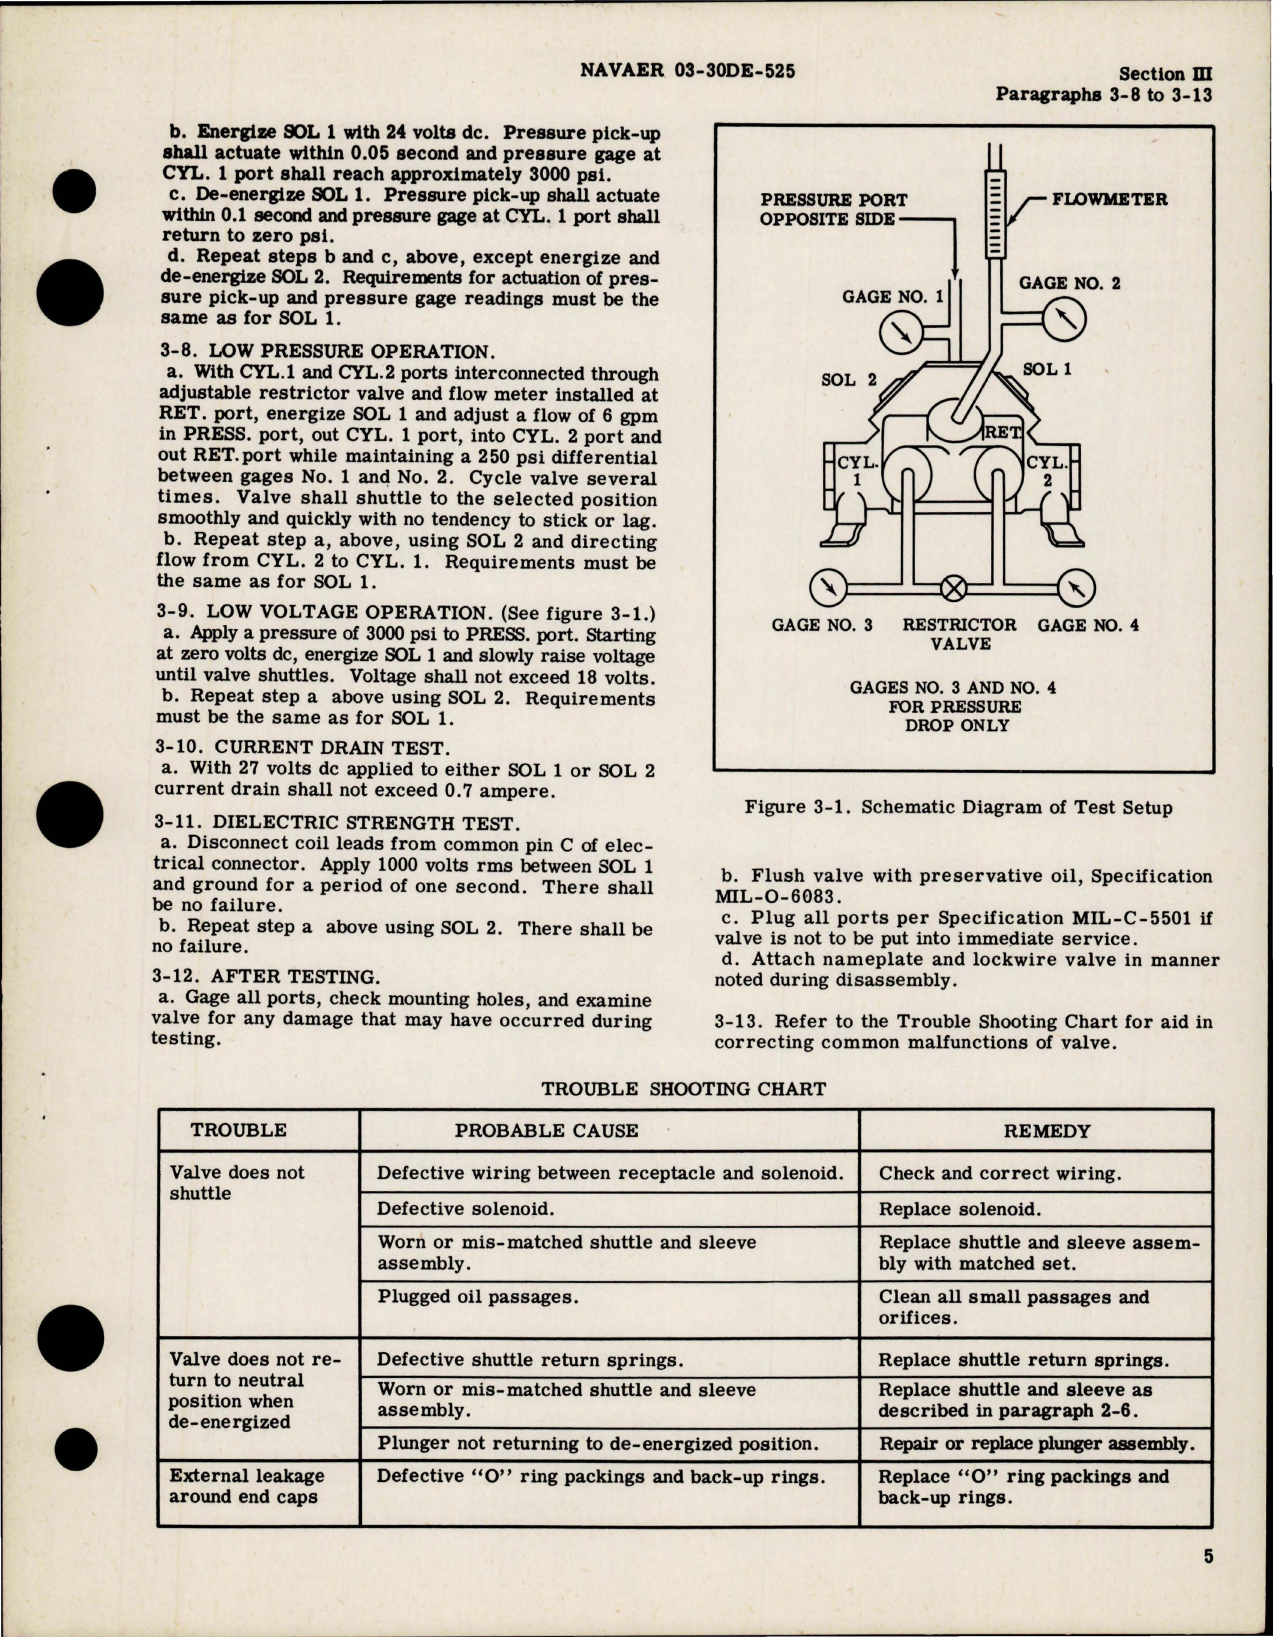 Sample page 7 from AirCorps Library document: Overhaul Instructions for Four-Way Selector Valves - Parts 11860, 12840, 12850, 12860 